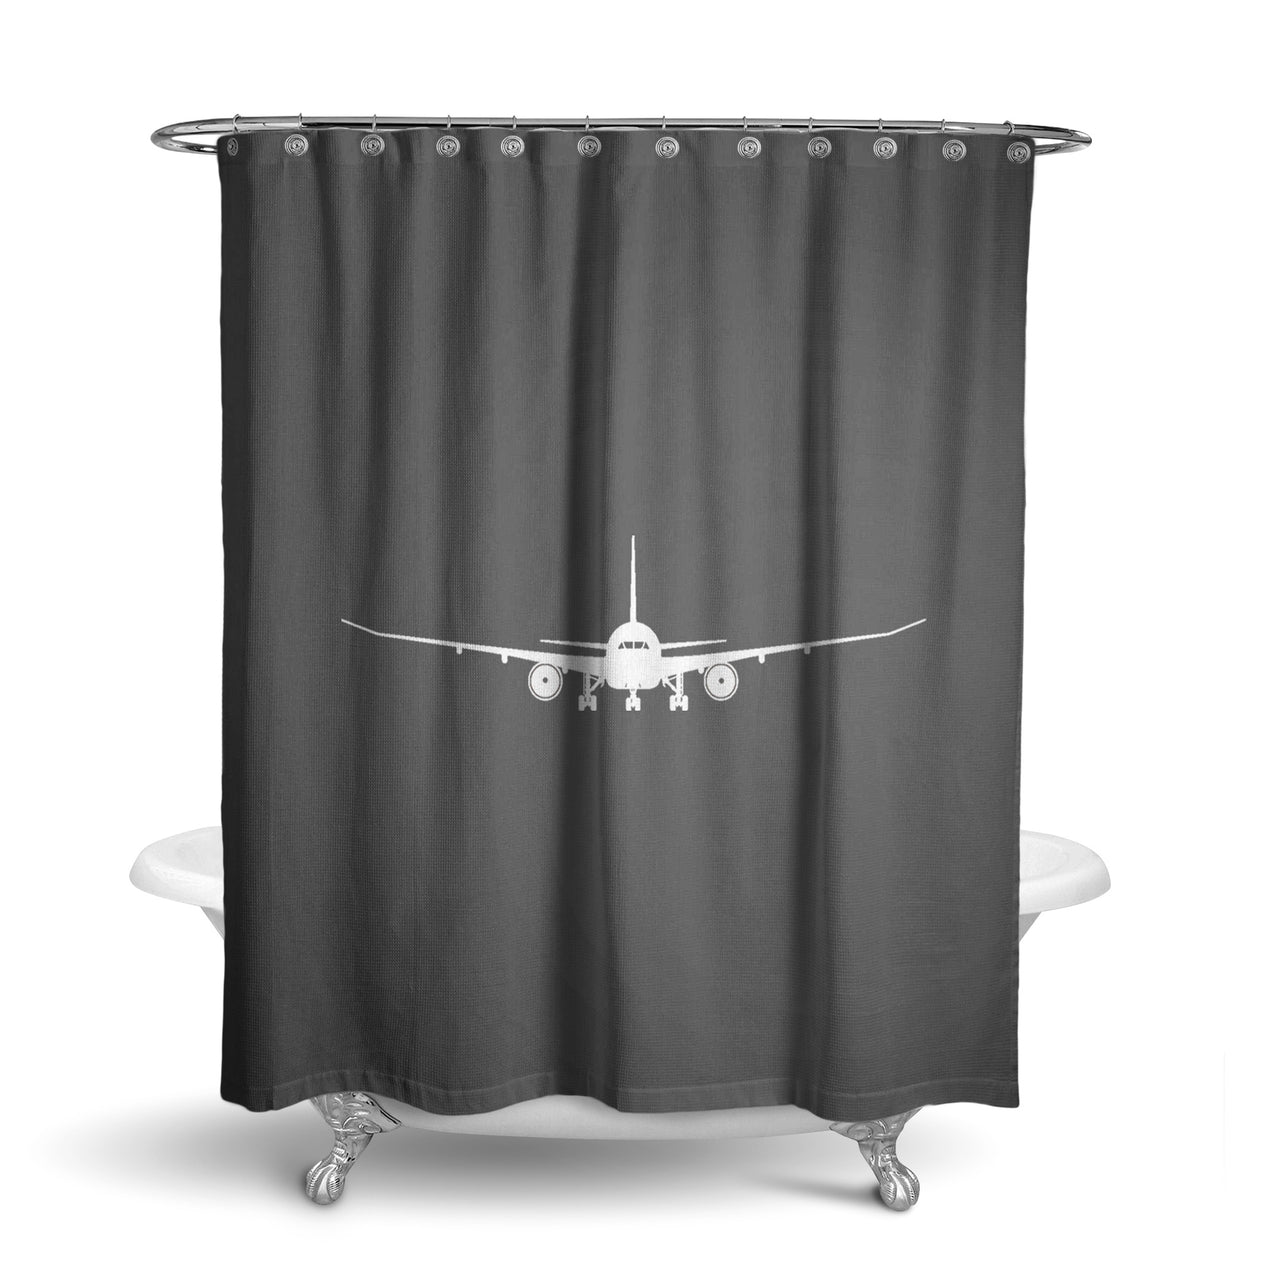 Boeing 787 Silhouette Designed Shower Curtains